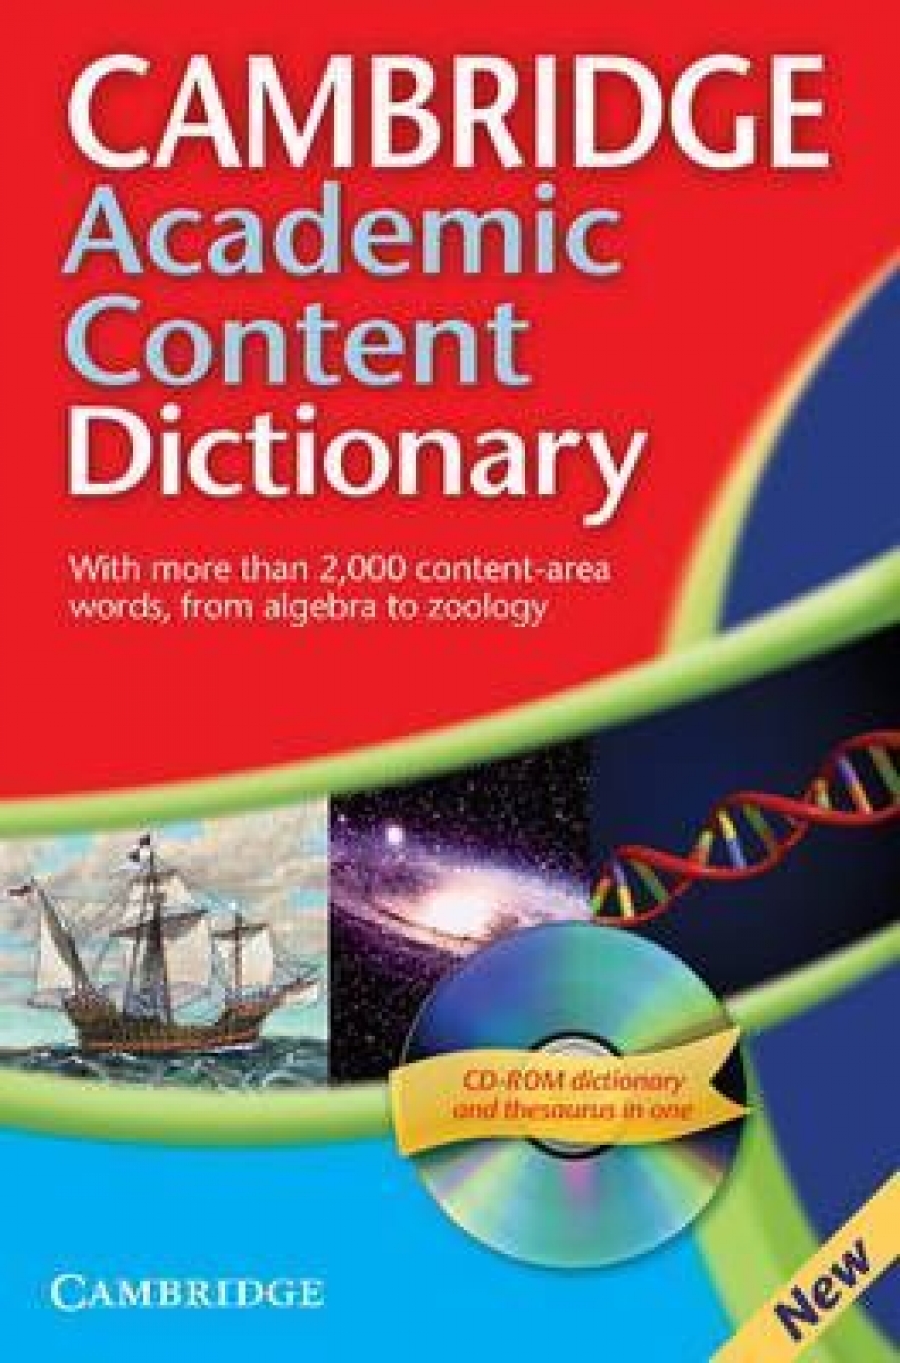 Cambridge Academic Content Dictionary Paperback with CD-ROM for Windows and Mac 